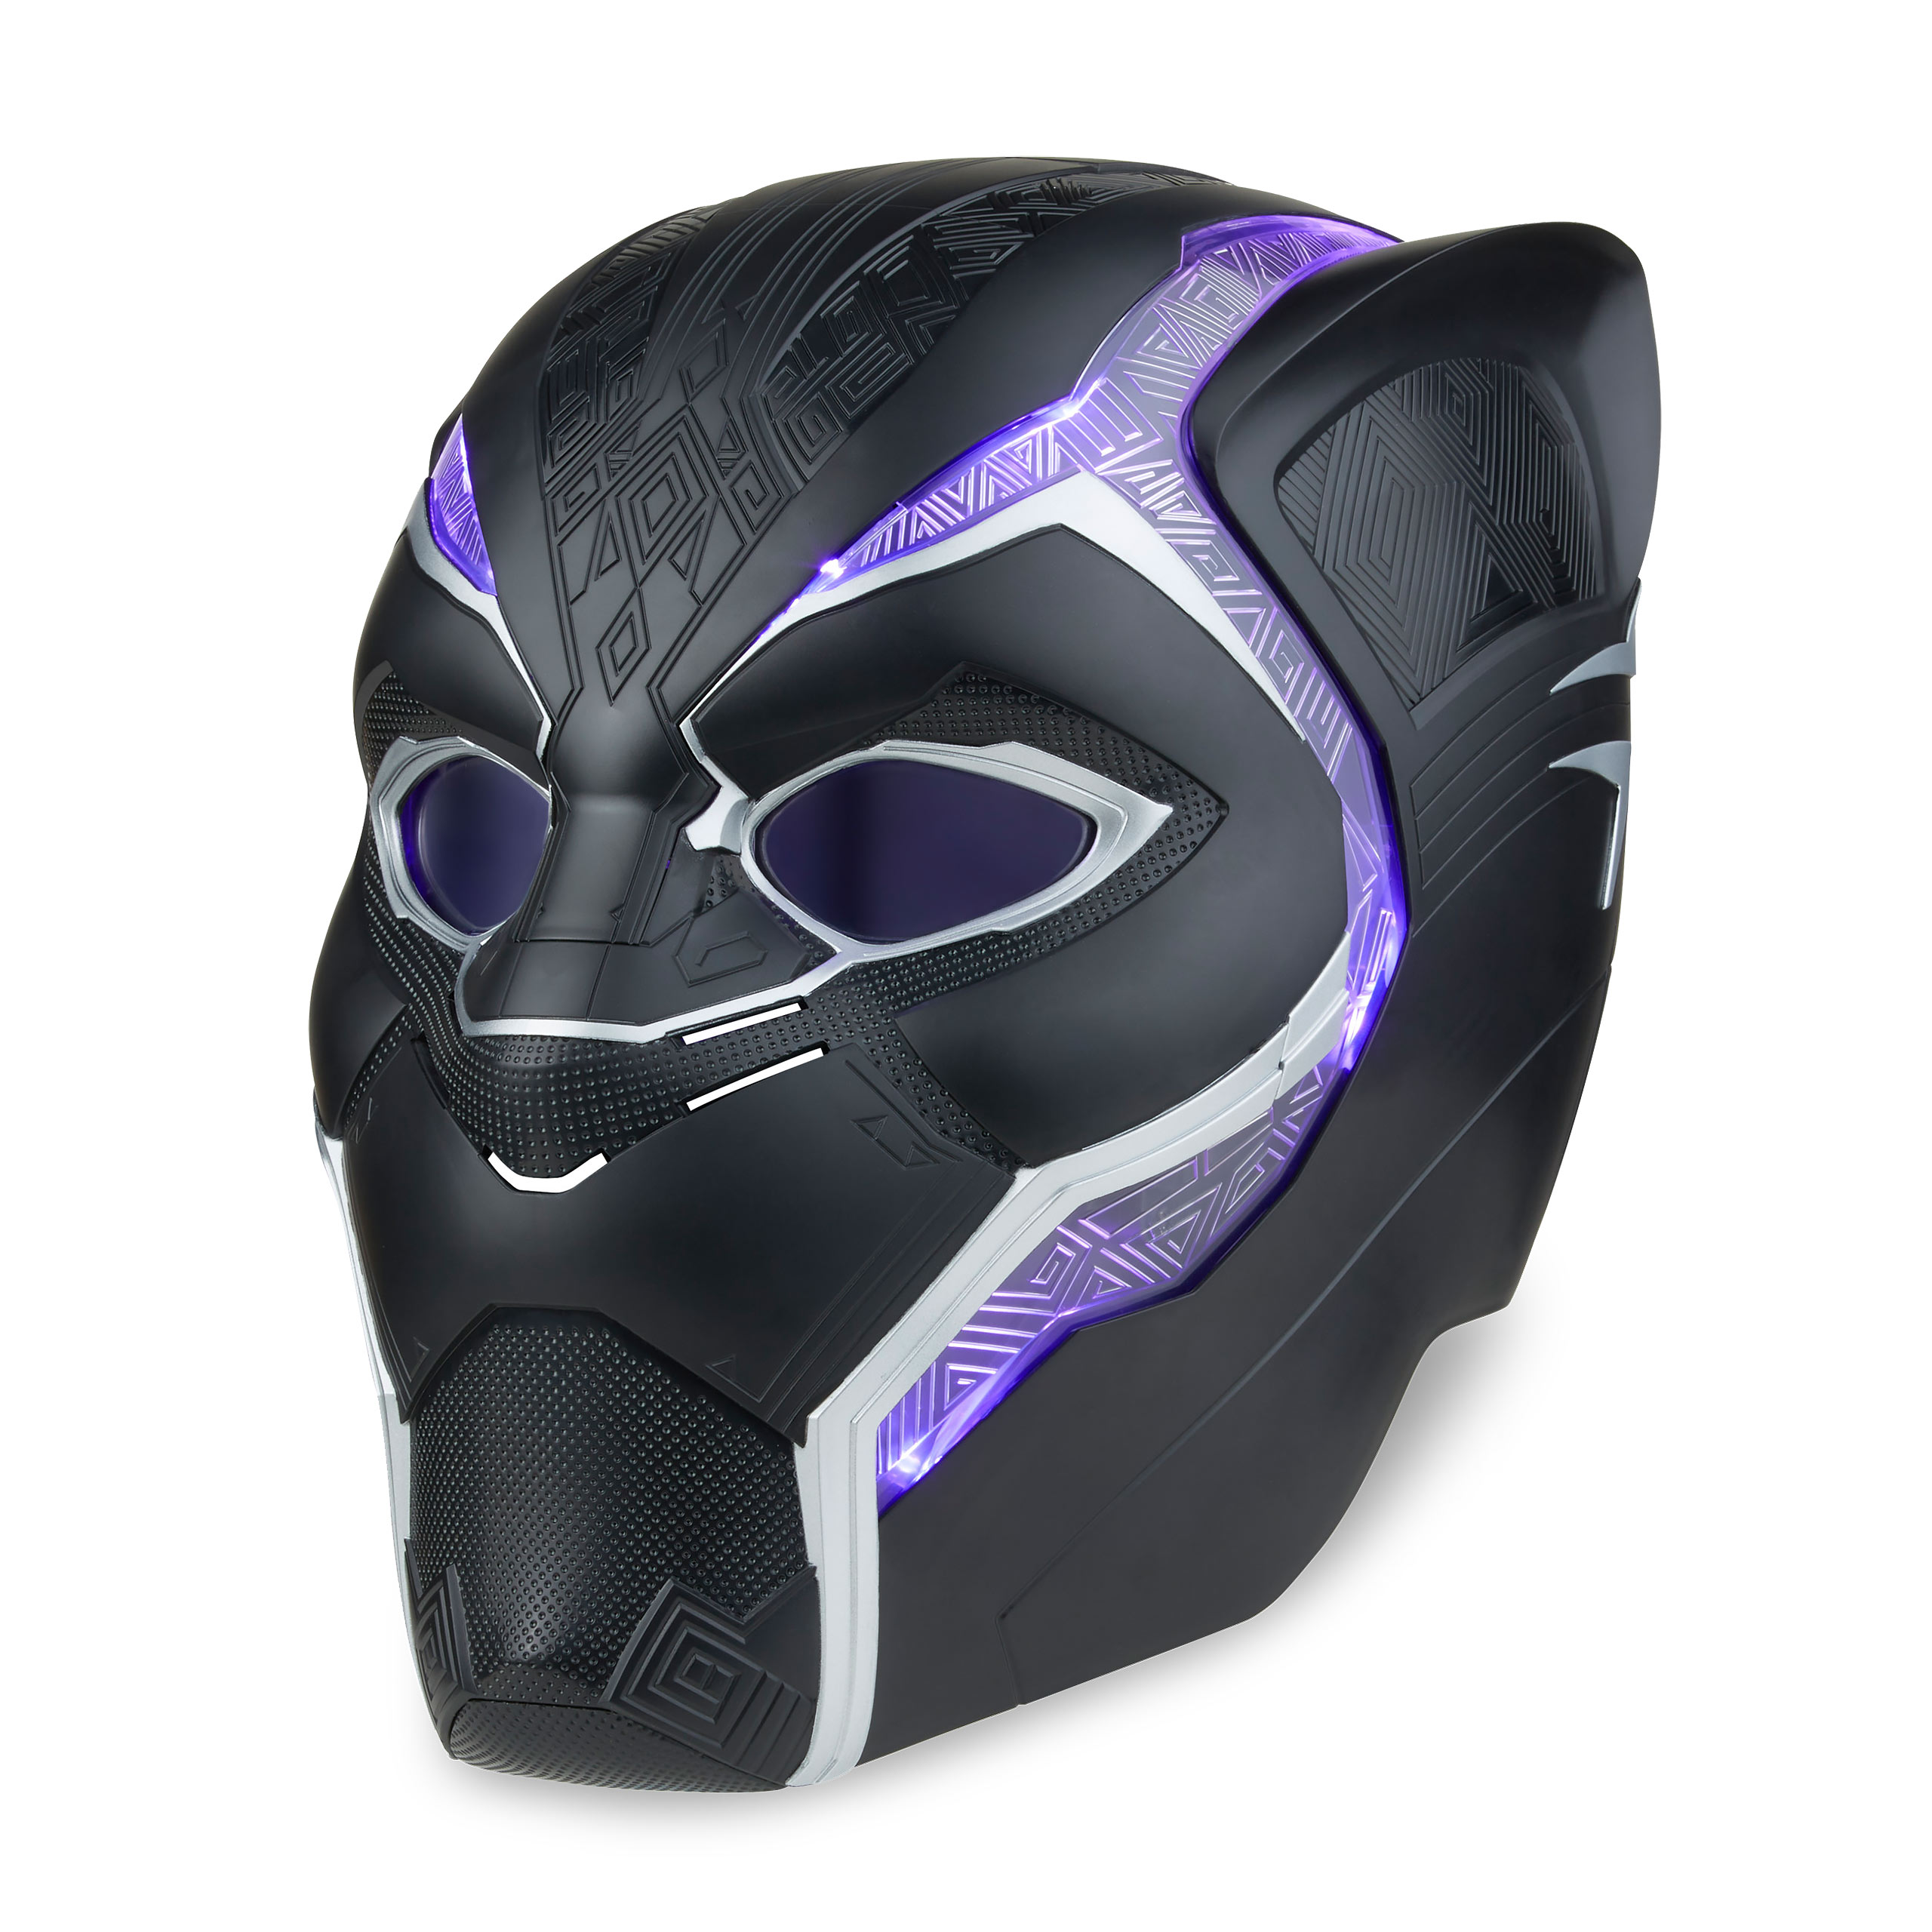 Marvel - Black Panther Helmet Replica with Light Effects